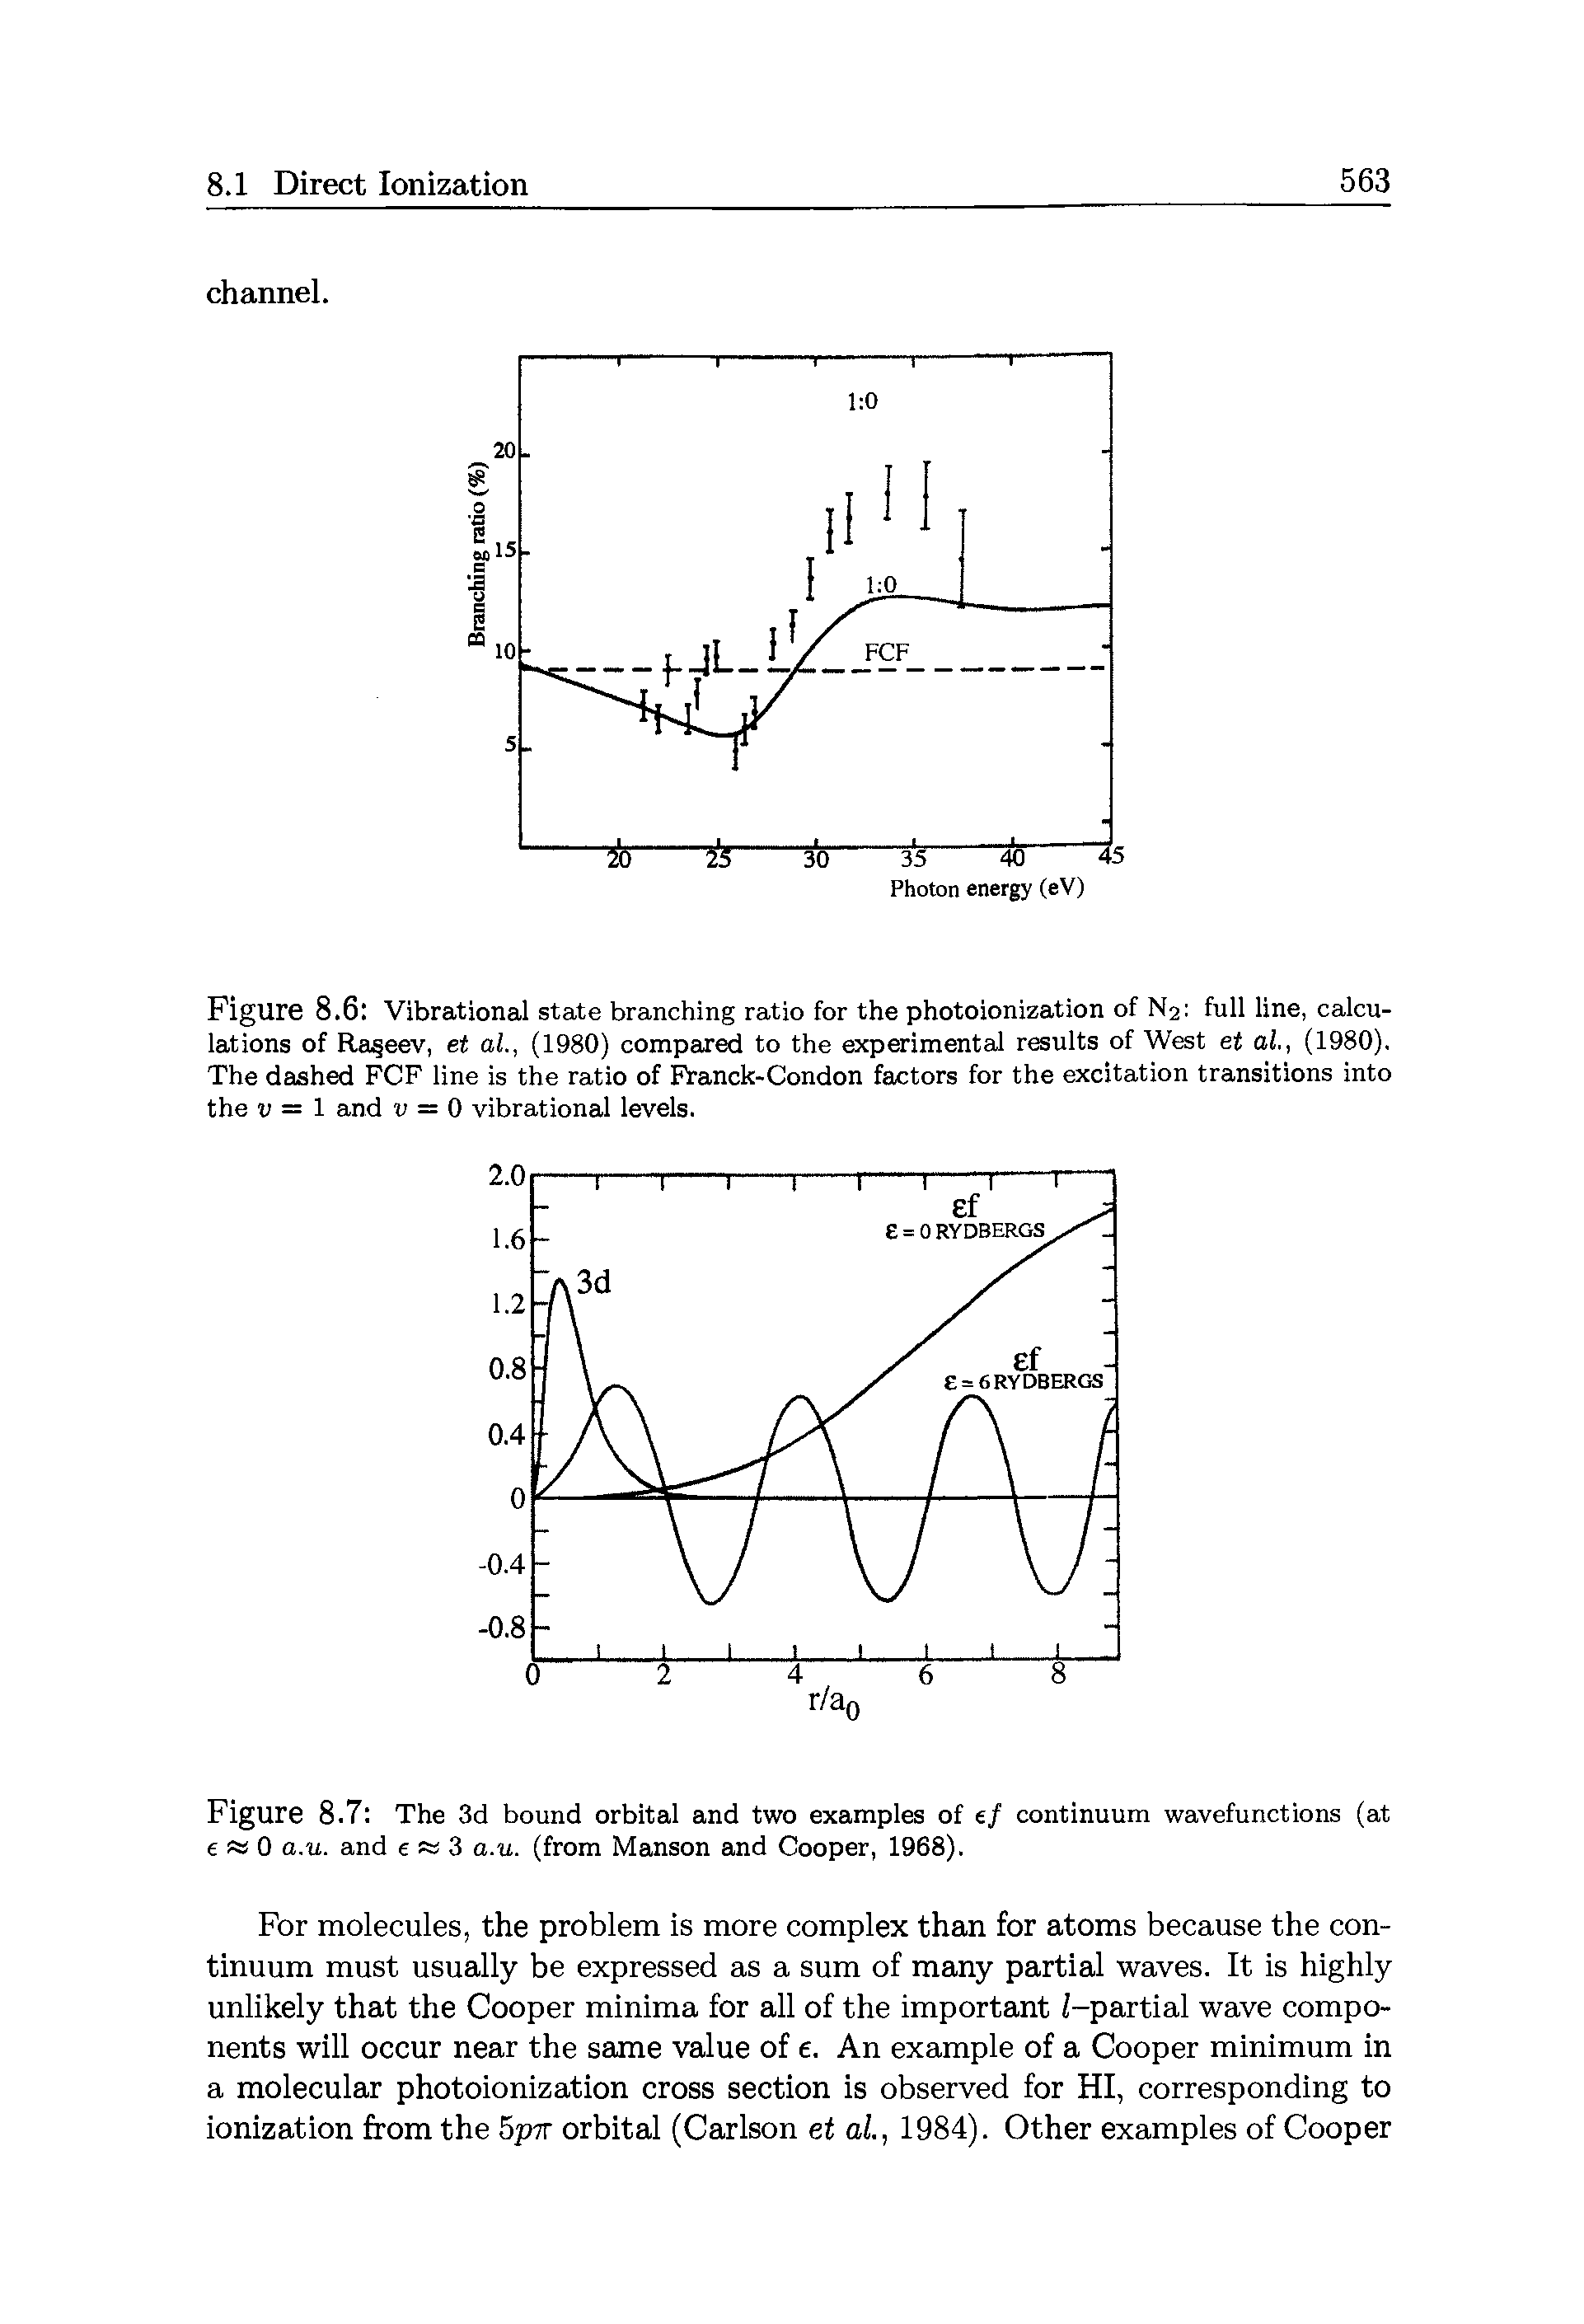 Figure 8.7 The 3d bound orbital and two examples of ef continuum wavefunctions (at e as 0 a.u. and e as 3 a.u. (from Manson and Cooper, 1968).